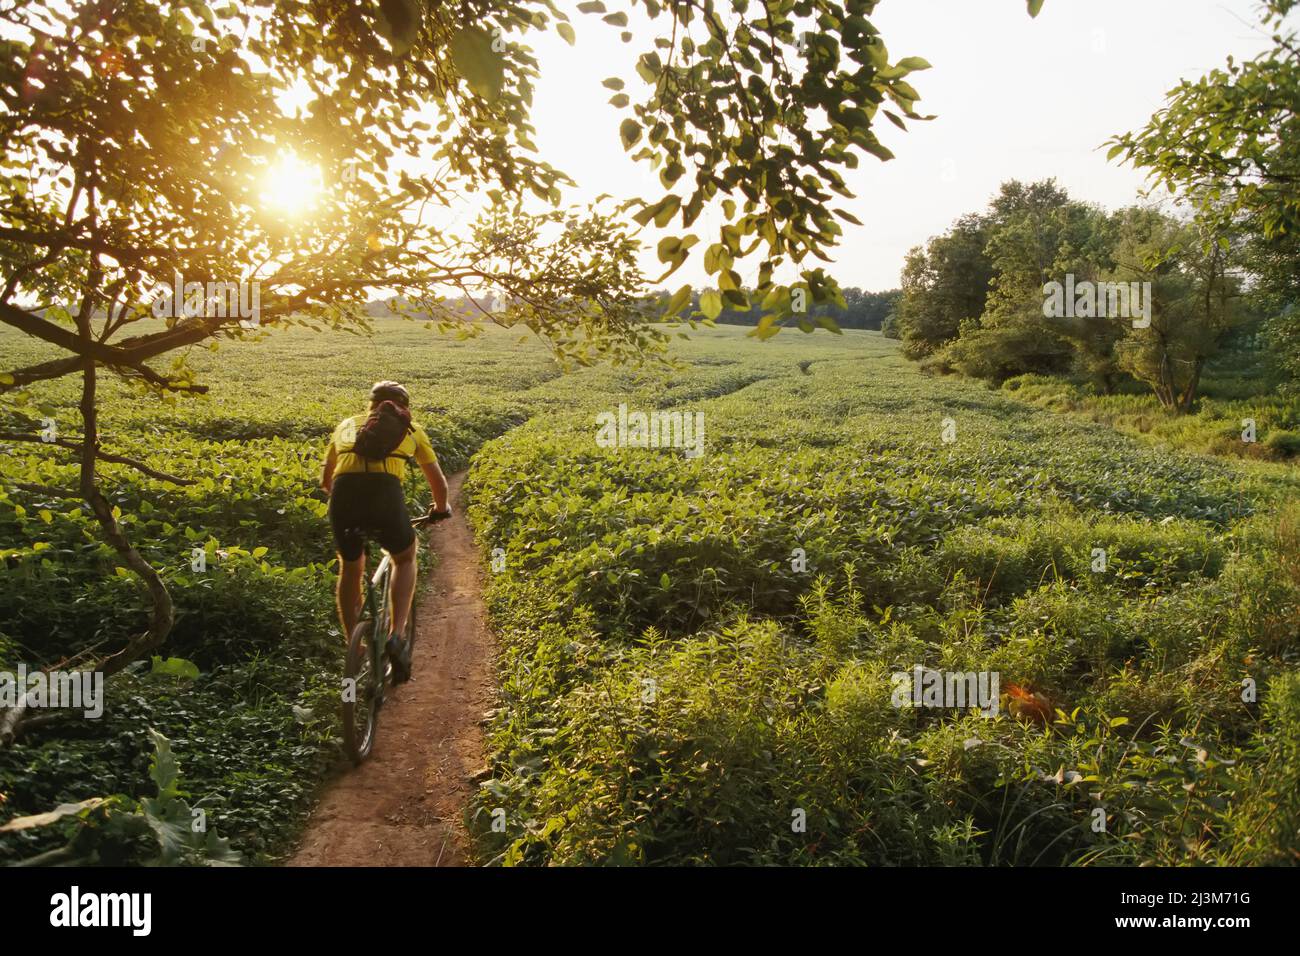 A bicyclist rides on a path through soybean fields.; Seneca State Park, Maryland, USA Stock Photo